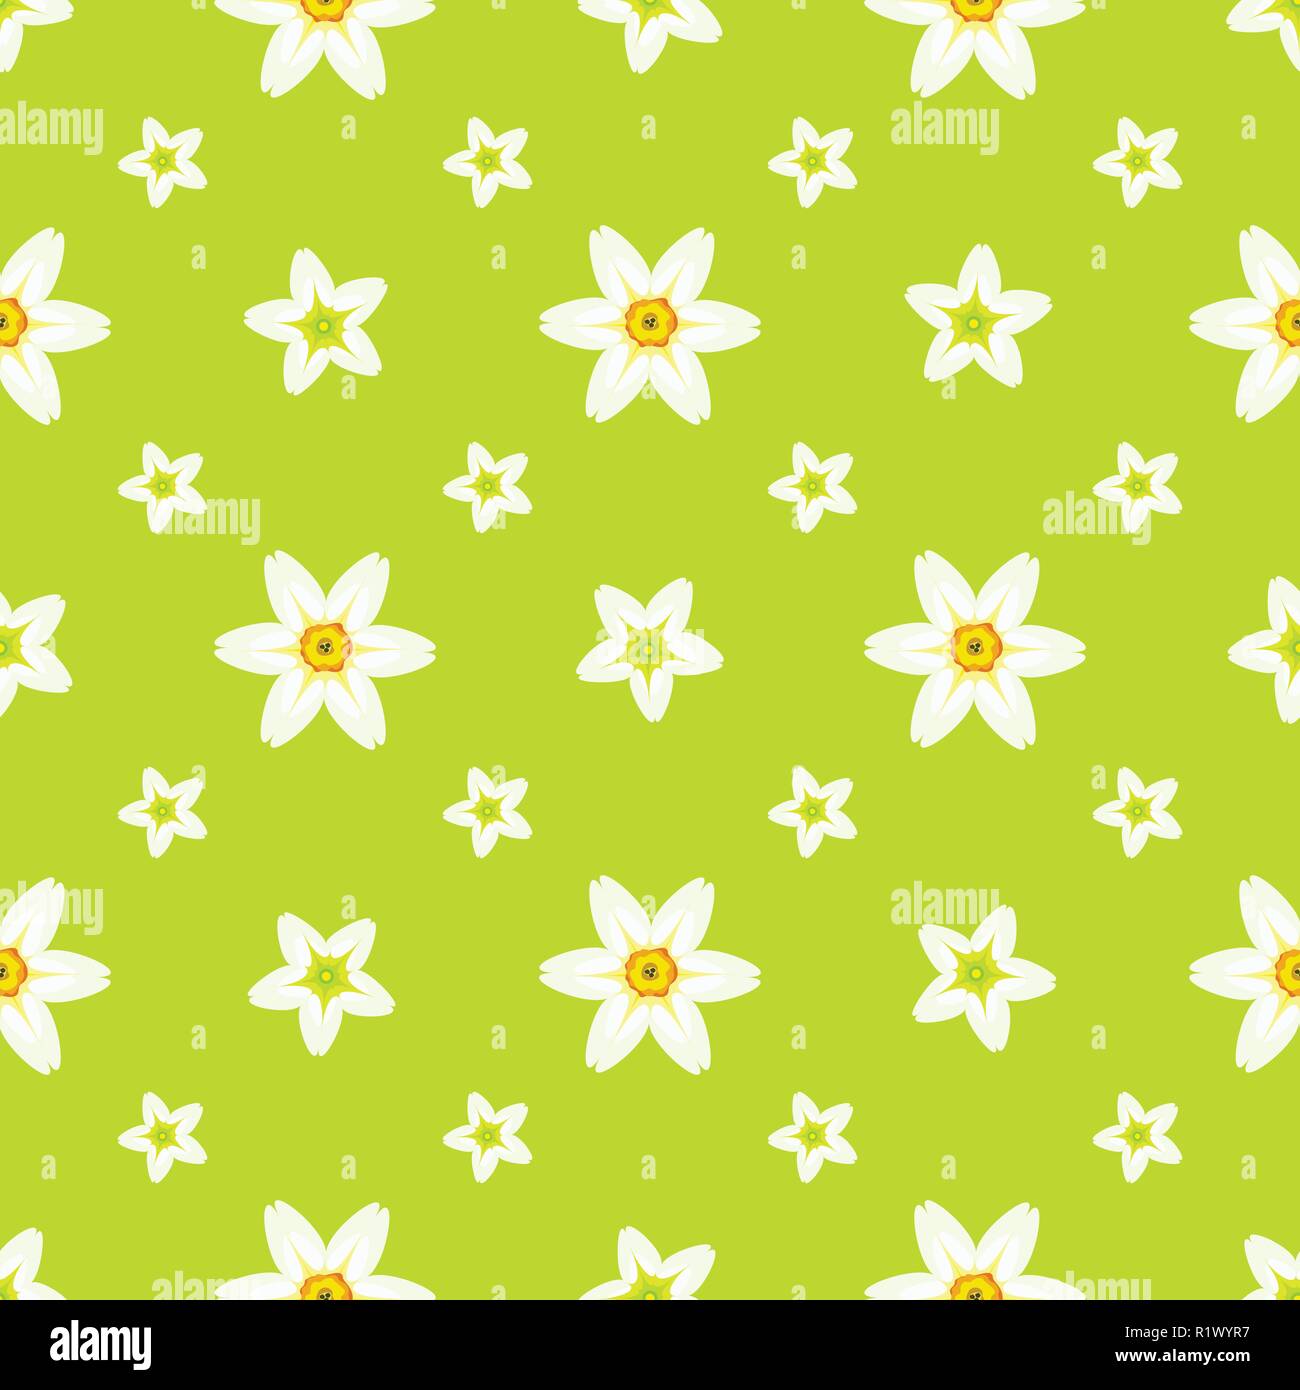 Daffodils Flowers Pattern Vector Free Vector cdr Download - 3axis.co